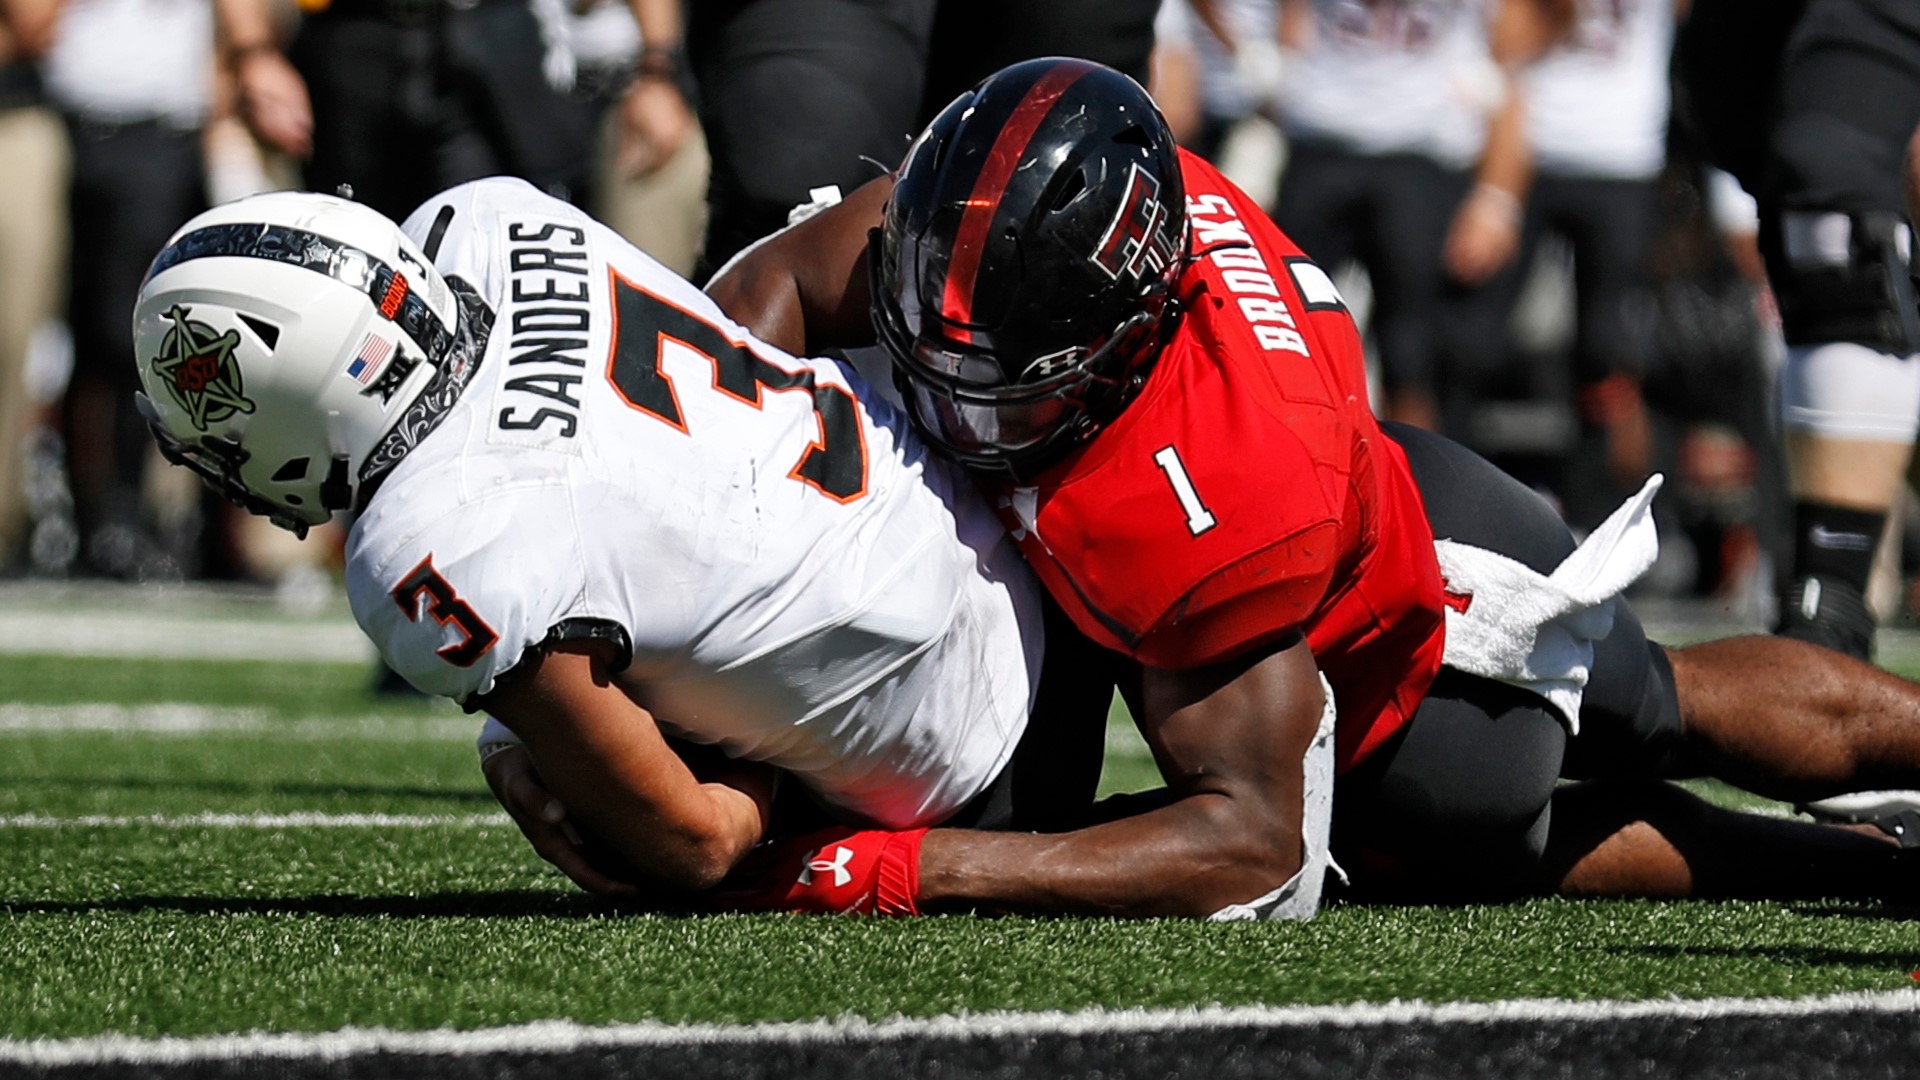 The Seattle Seahawks delivered one of the surprises of the first round of the NFL draft by selecting Texas Tech linebacker Jordyn Brooks with the No. 27 pick.